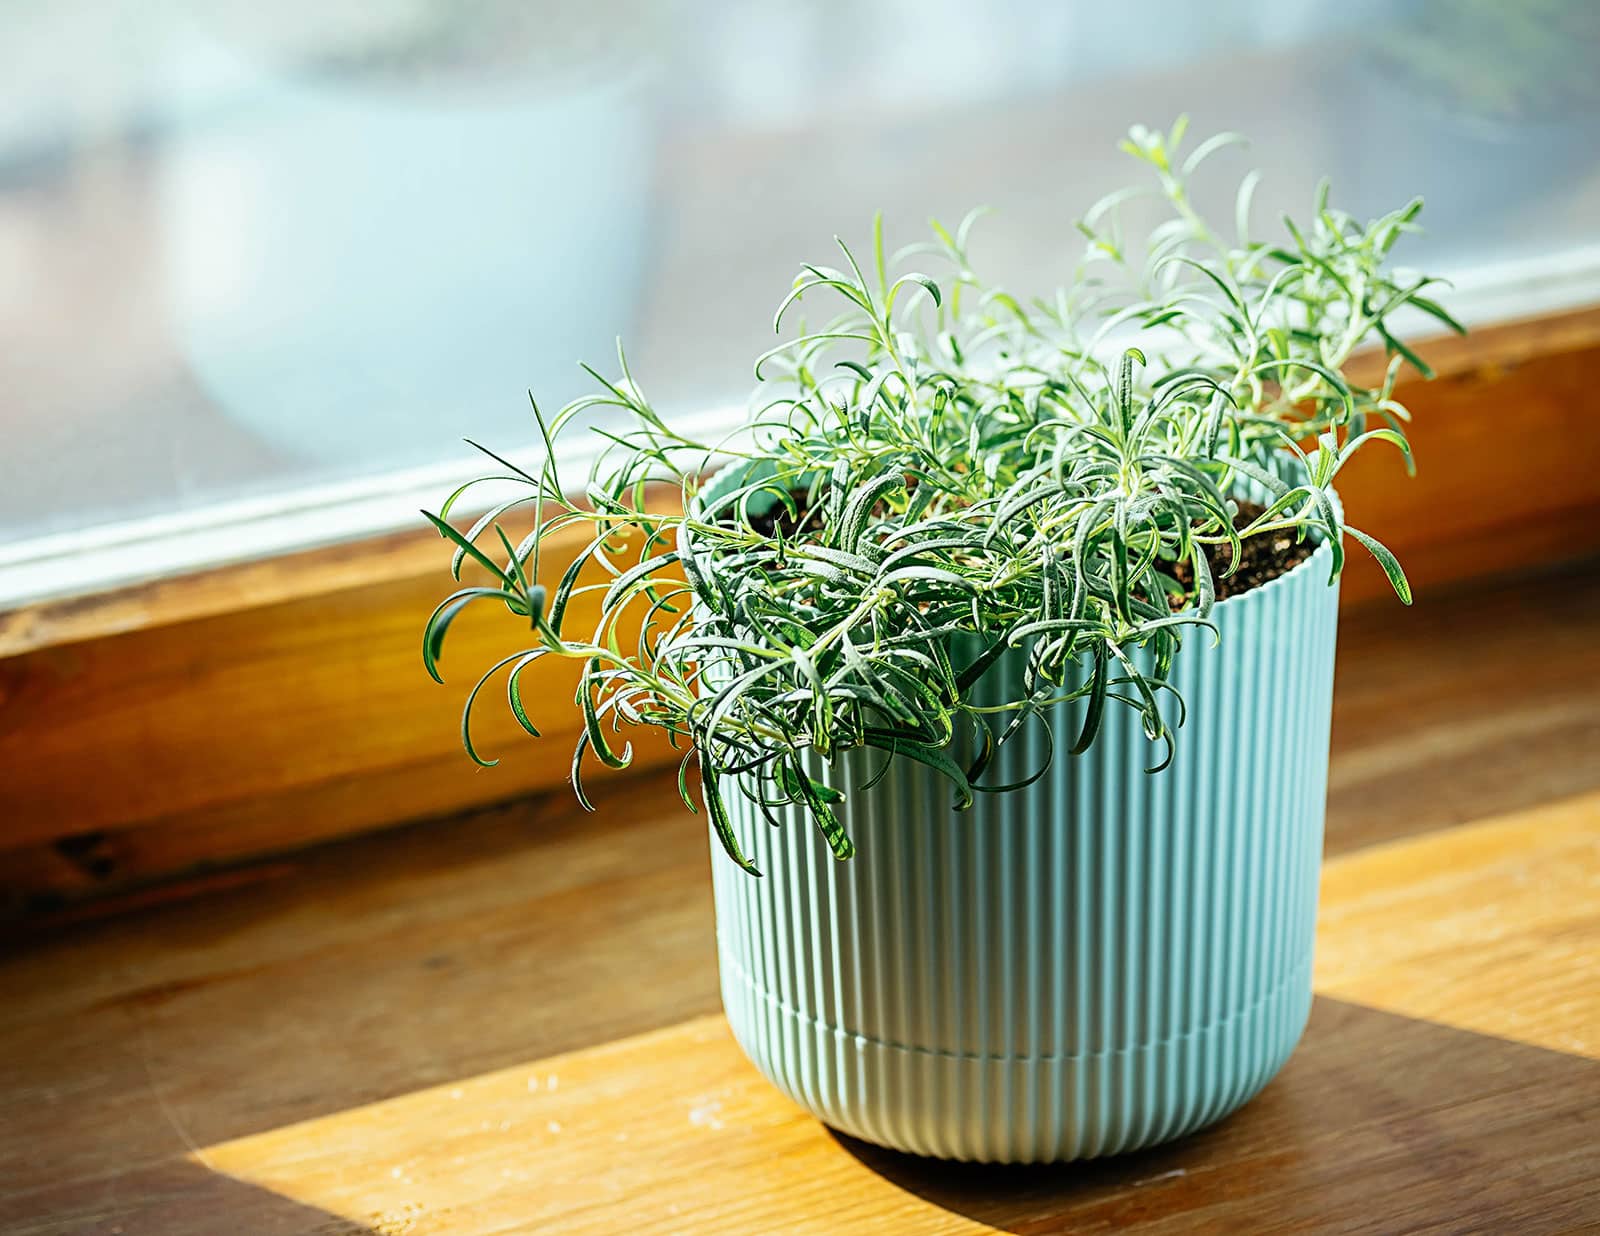 Potted rosemary plant